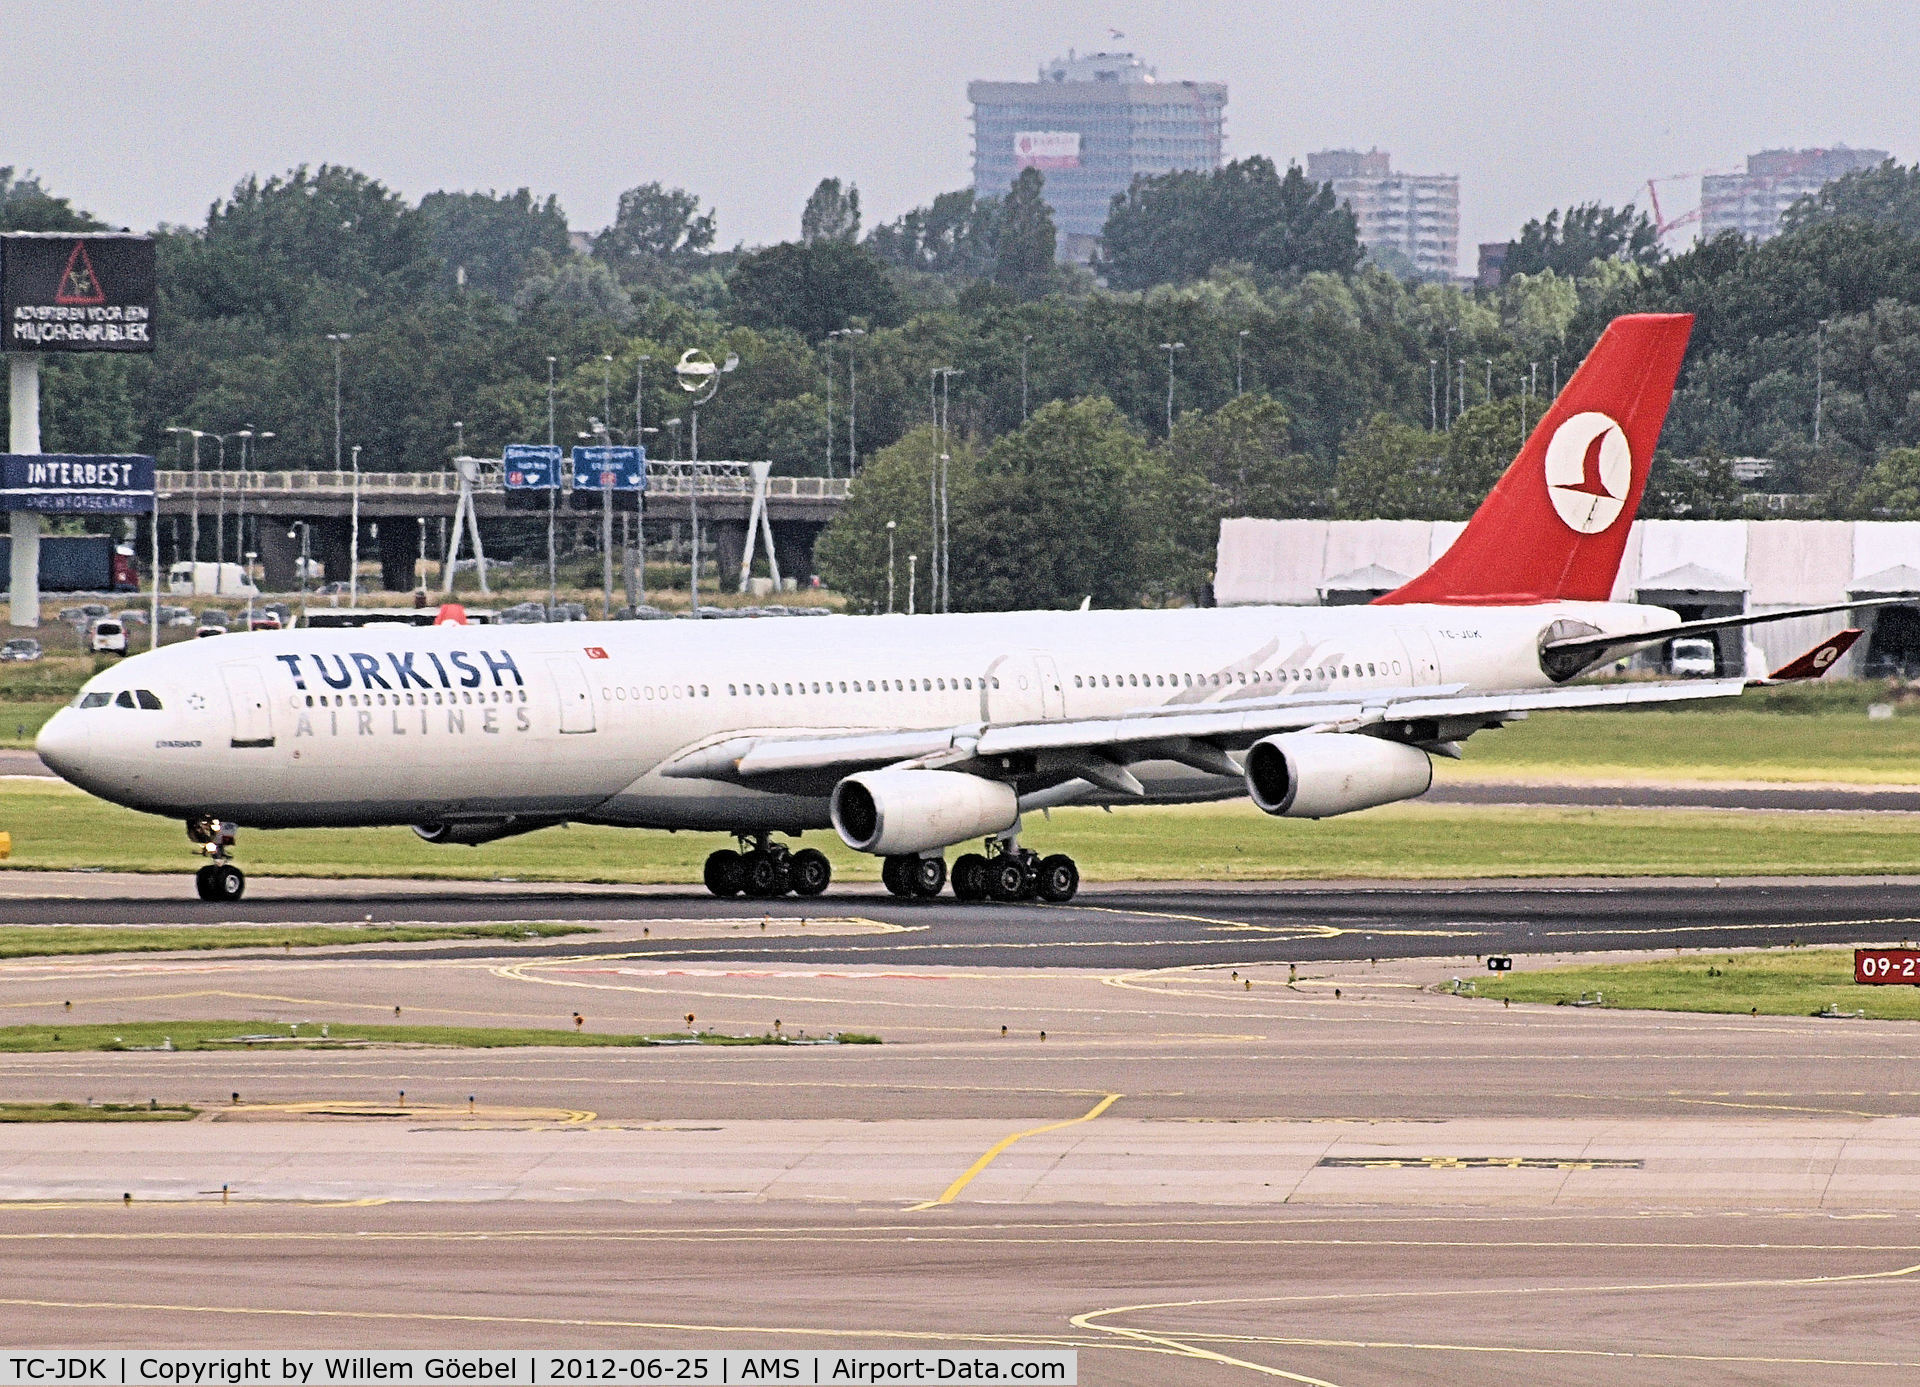 TC-JDK, 1993 Airbus A340-311 C/N 025, Taxi to his gate on Schiphol Airport